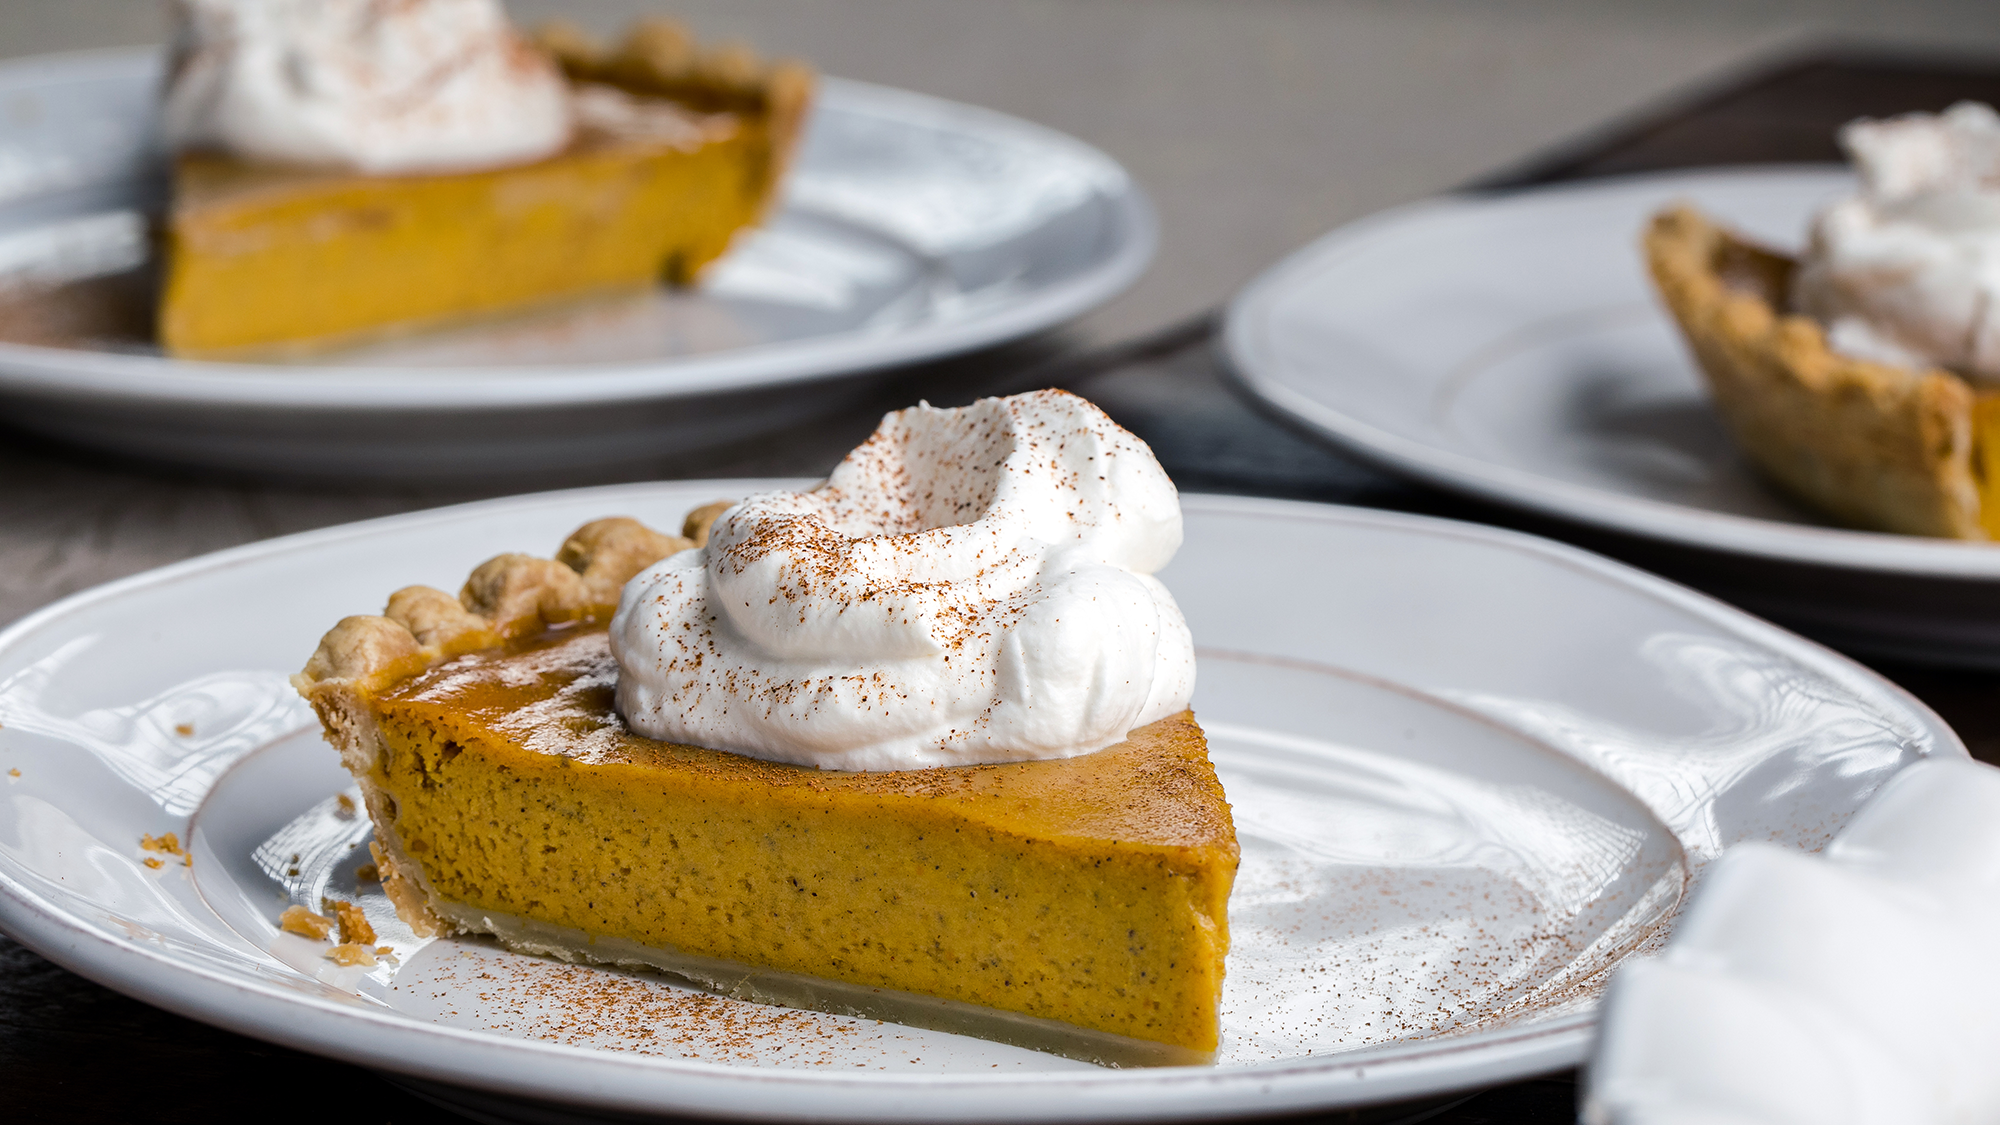 A slice of yummy pumpkin pie with whipped cream